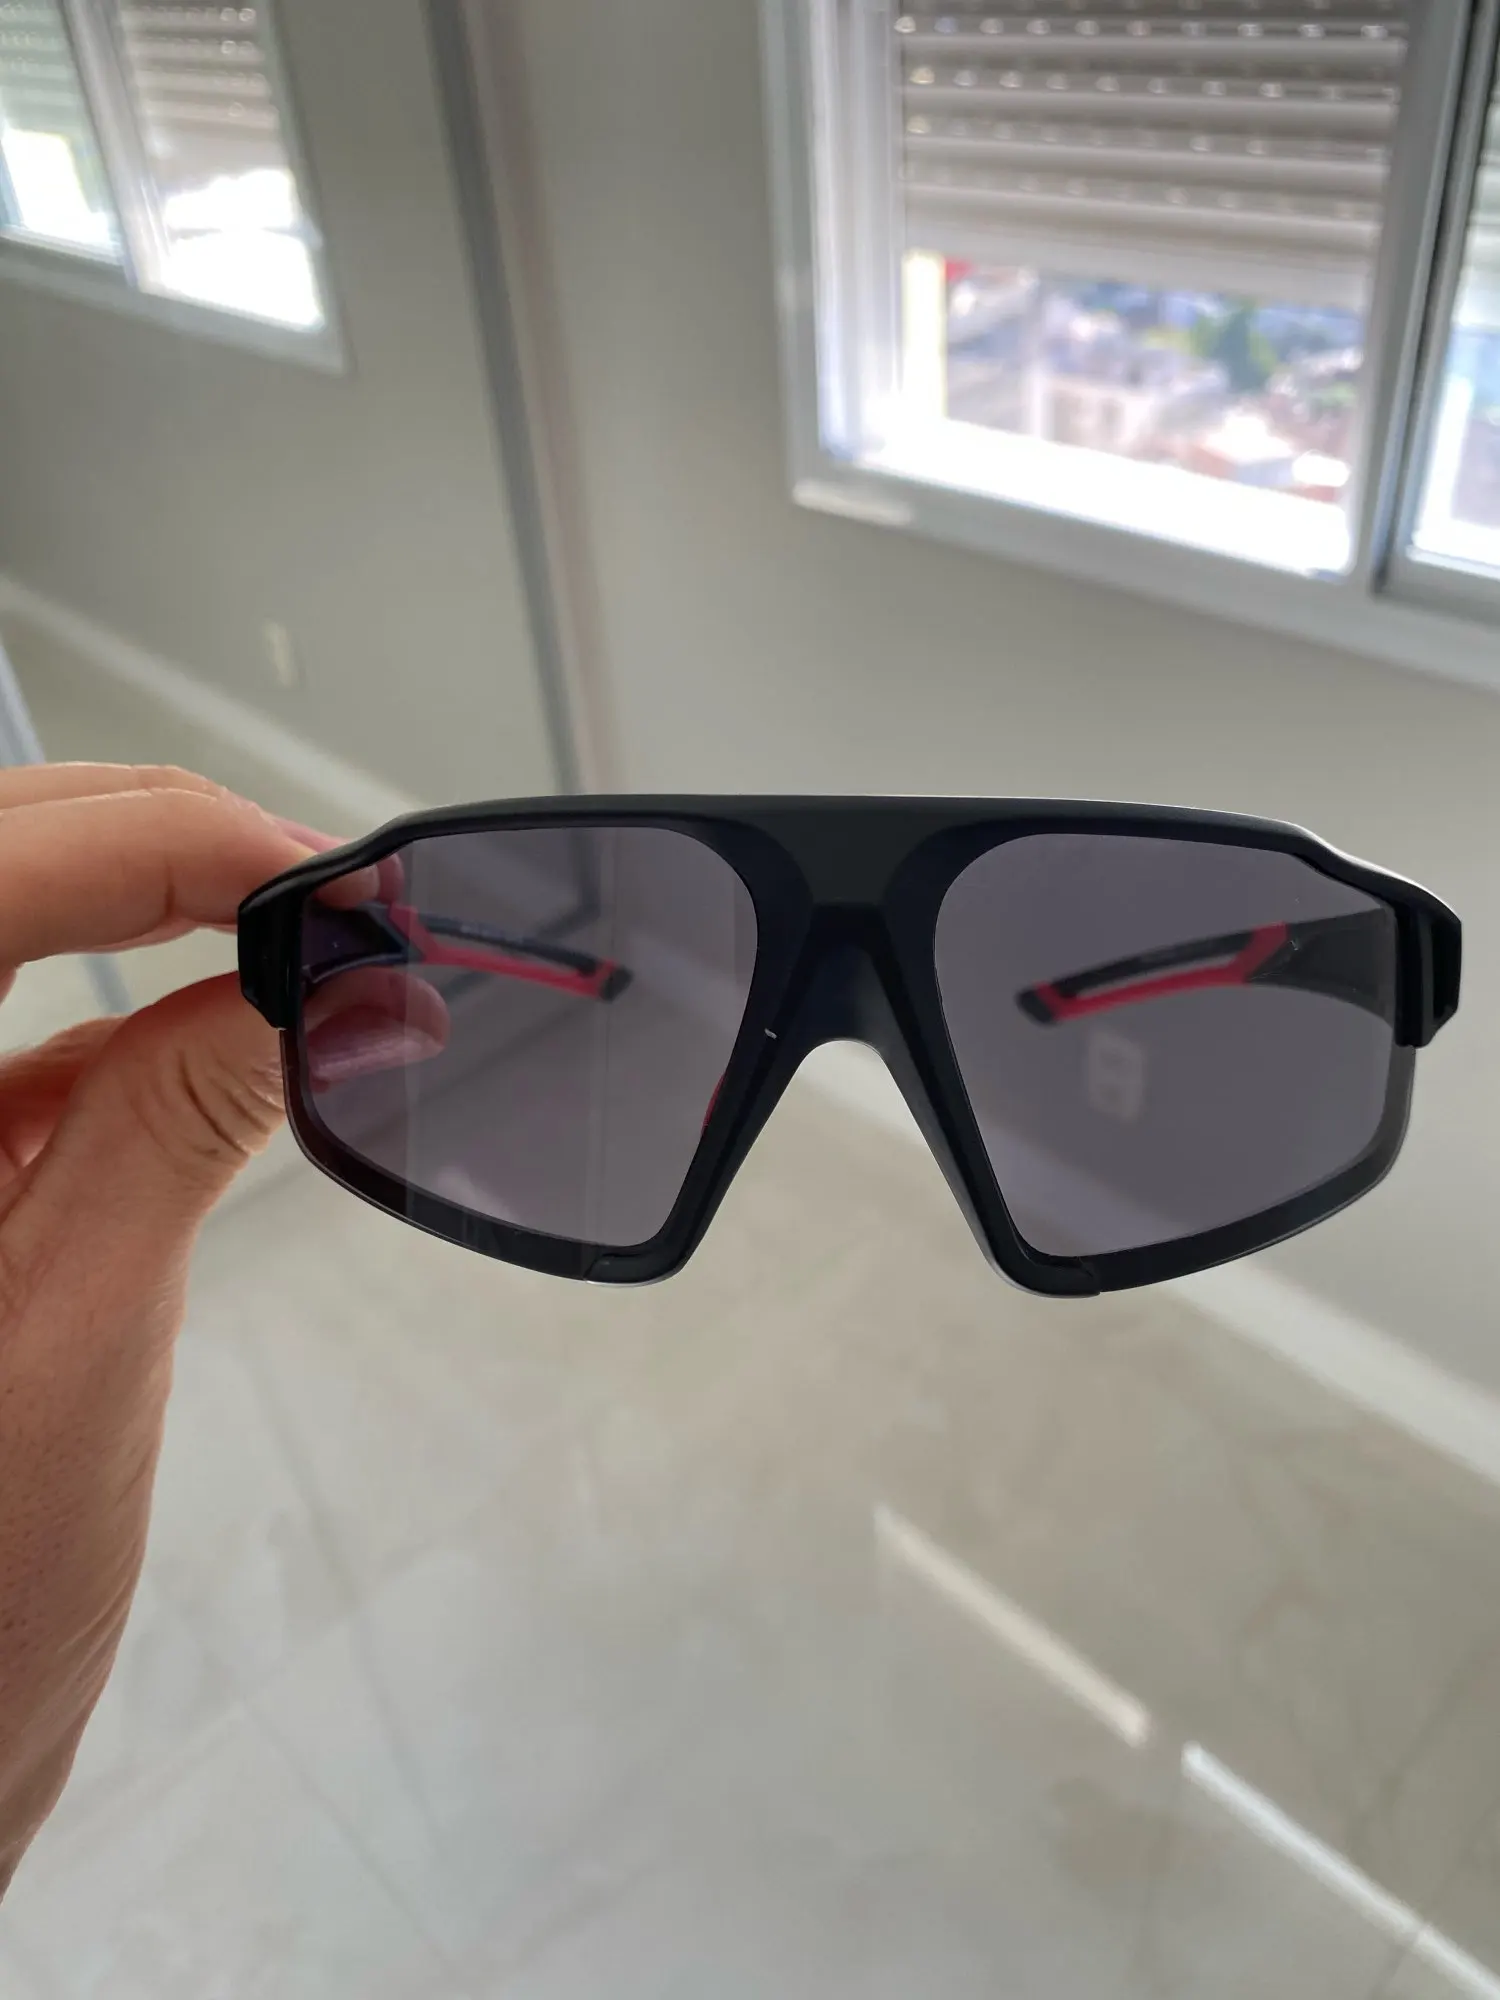 ROCKBROS Photochromic Cycling Glasses photo review